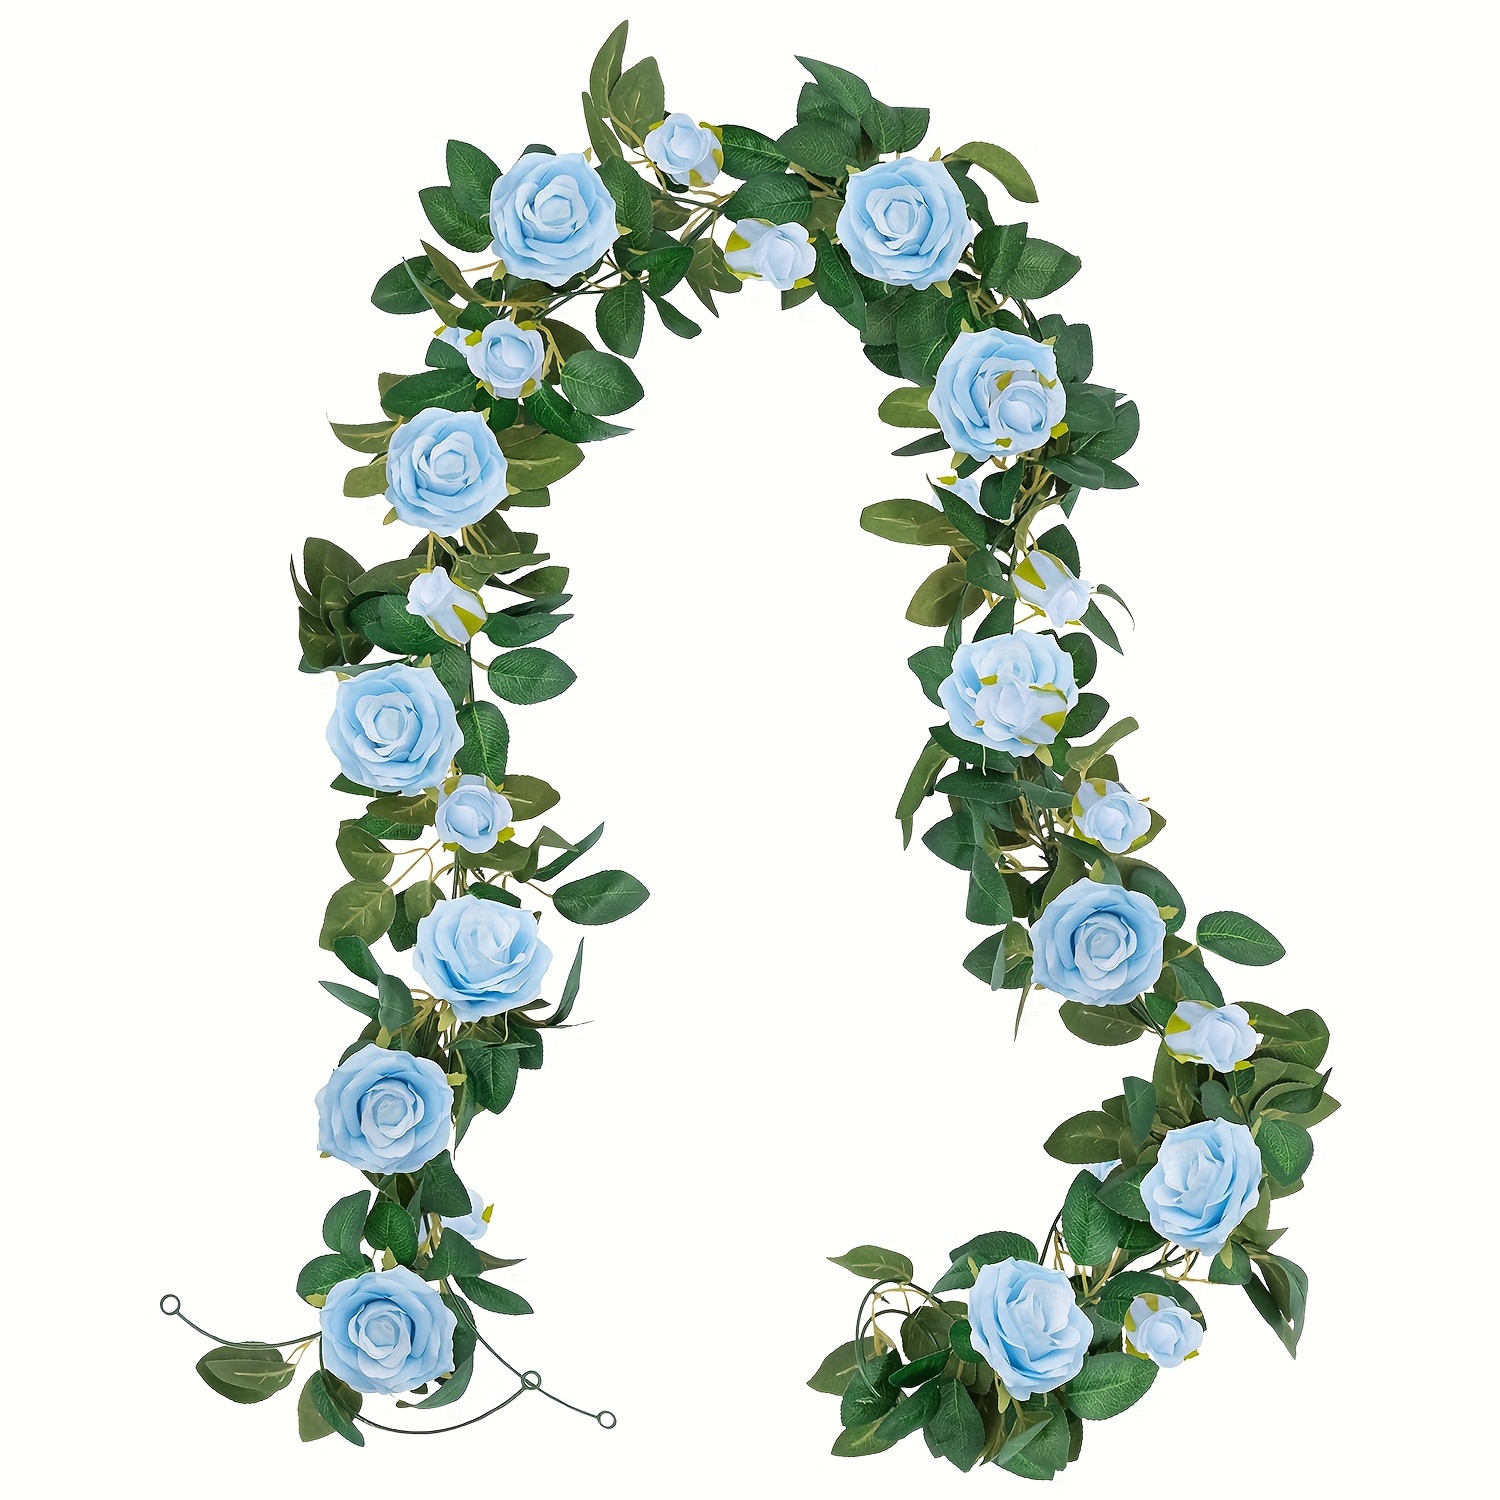 

3pcs 19.5ft Blue Rose Garland Fake Flower Vines Faux Artificial Floral Garland Hanging Rose Ivy For Wedding Arch Garden Ceremony Background Valentine's Day Outdoor Wall Decor Spring Decor